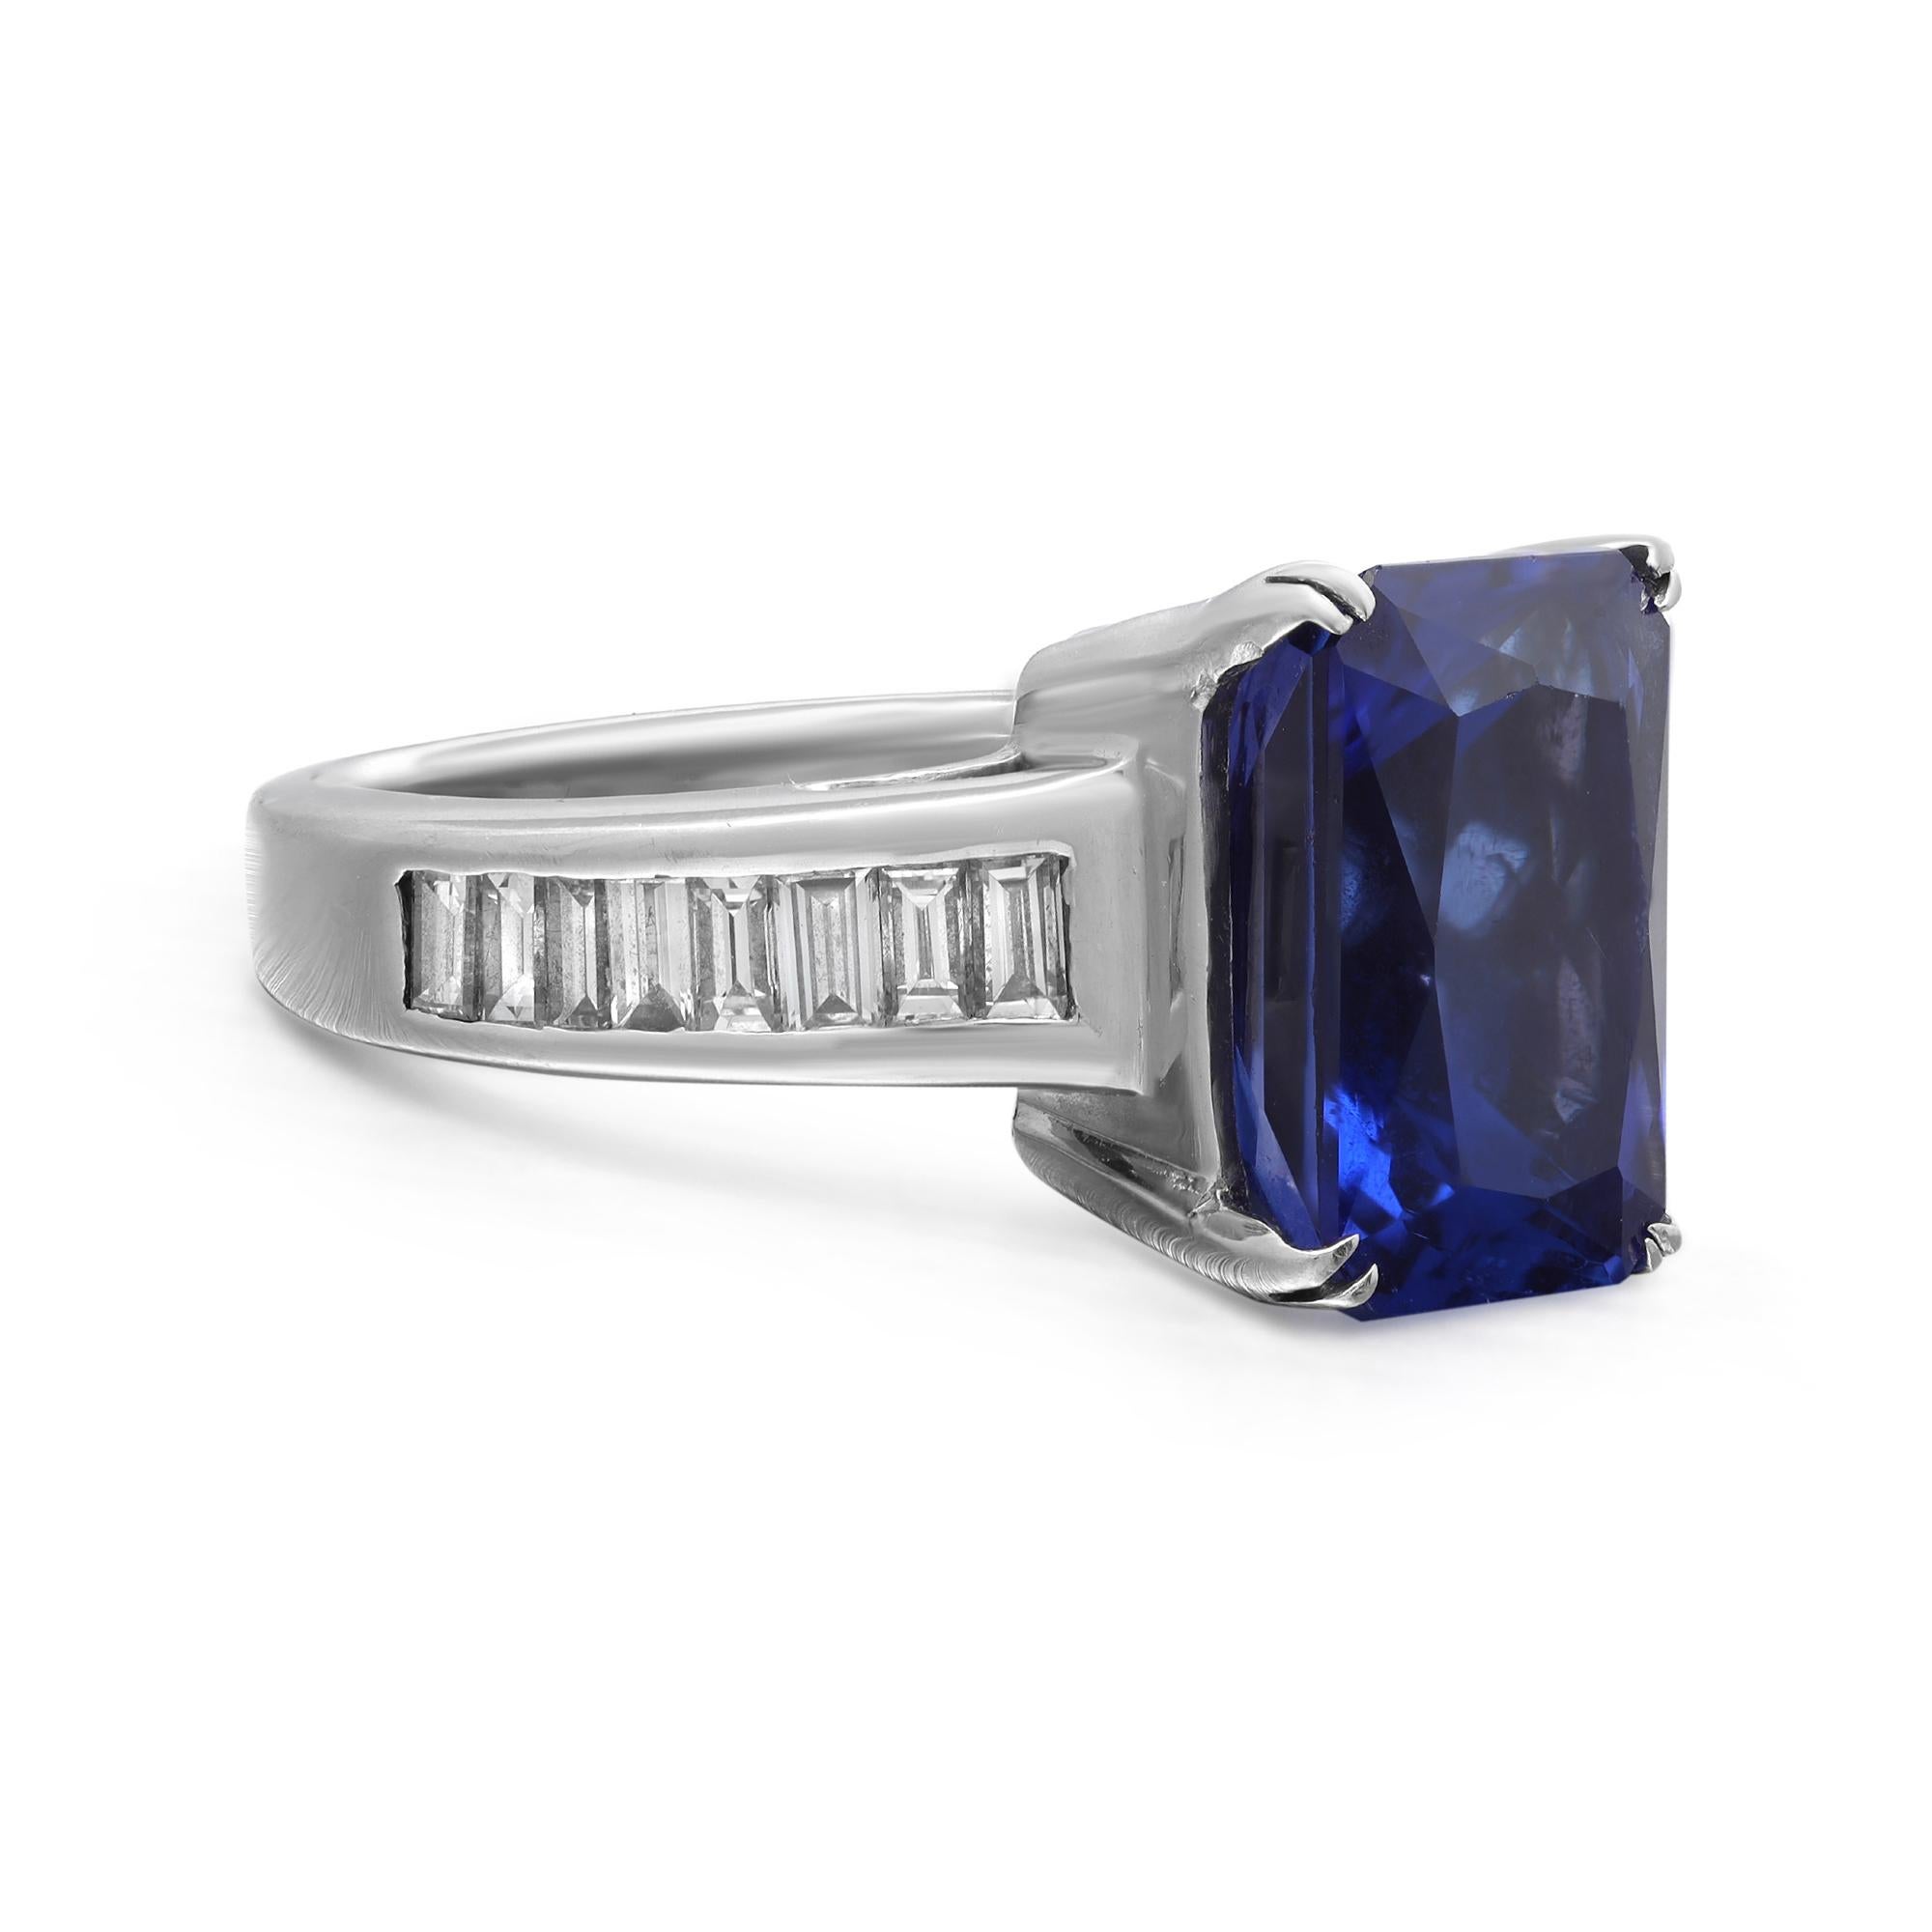 8.47Cts Emerald Cut Tanzanite 1.00Cts Diamond Ring 18K White Gold In Excellent Condition For Sale In New York, NY